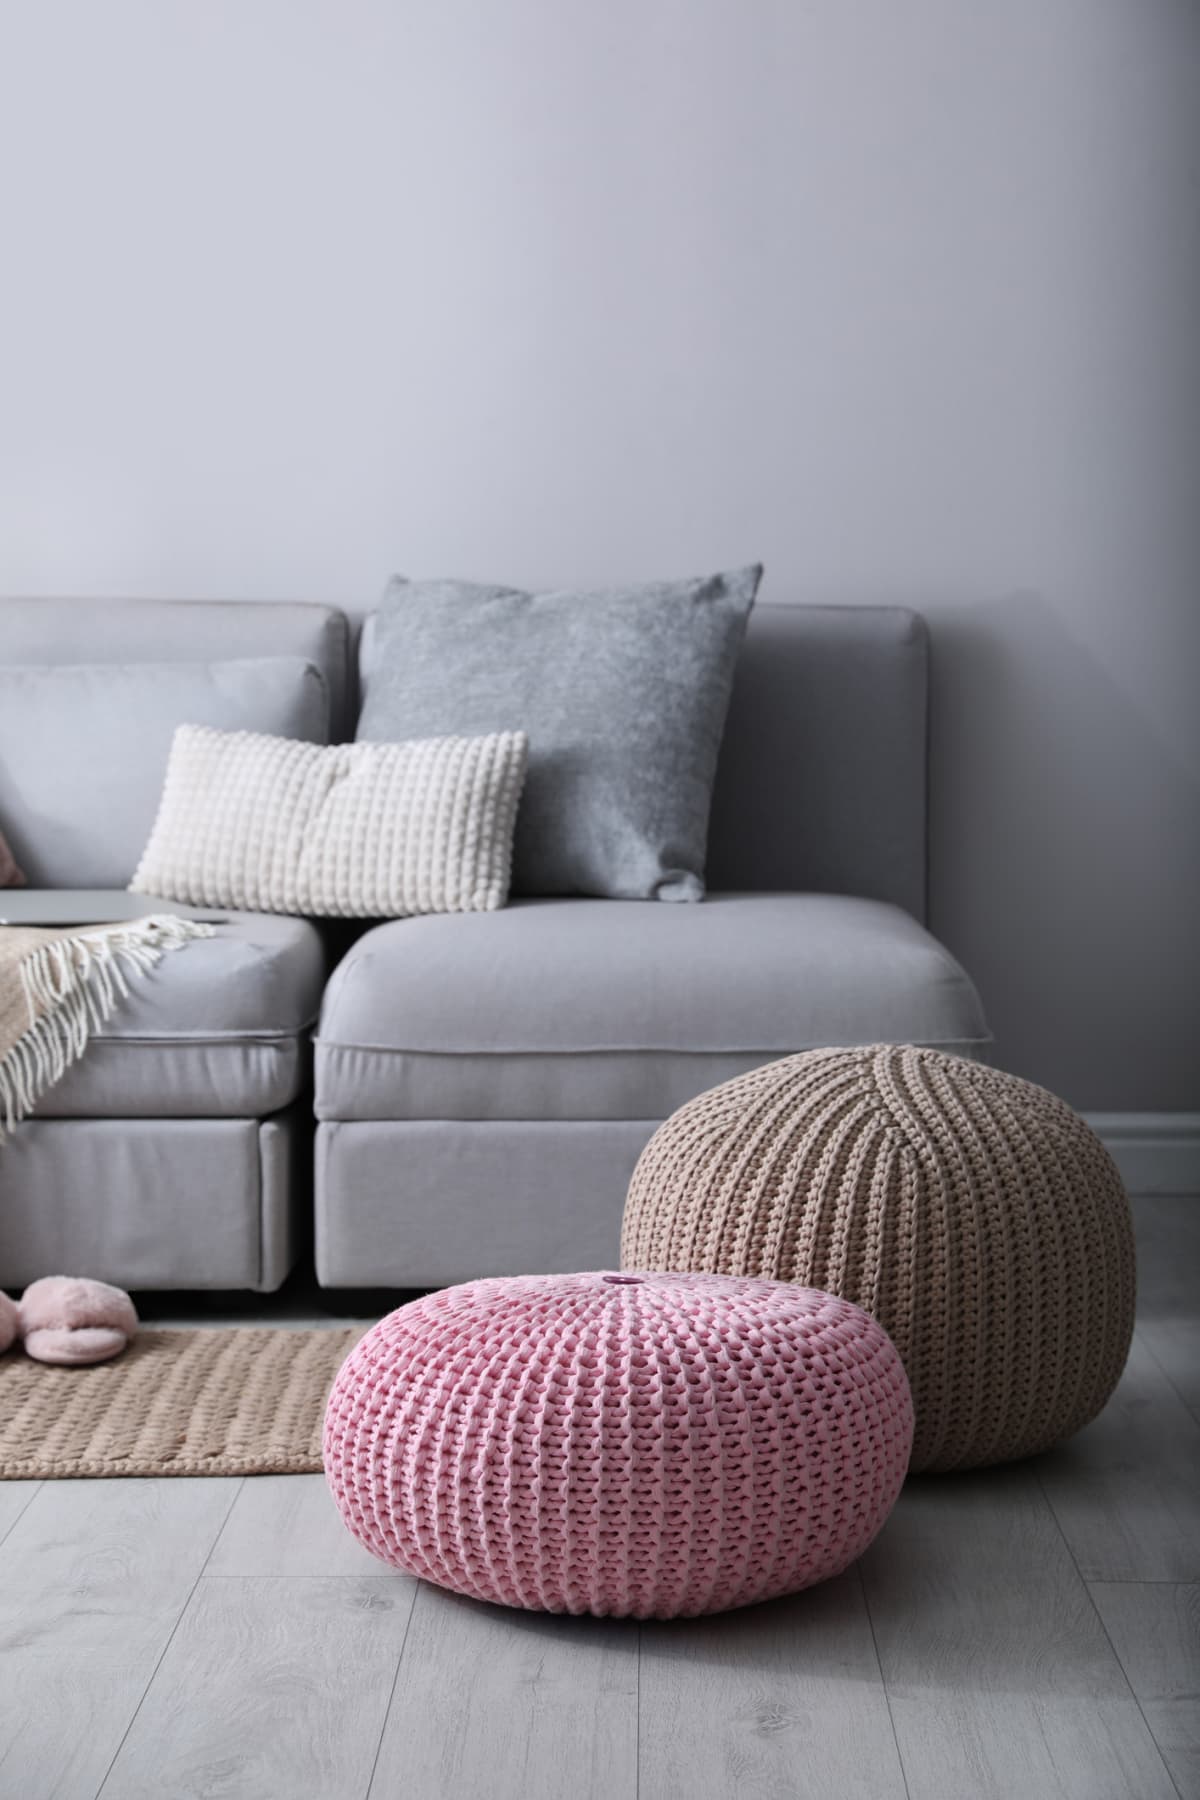 Stylish knitted poufs in front of gray living room sofa